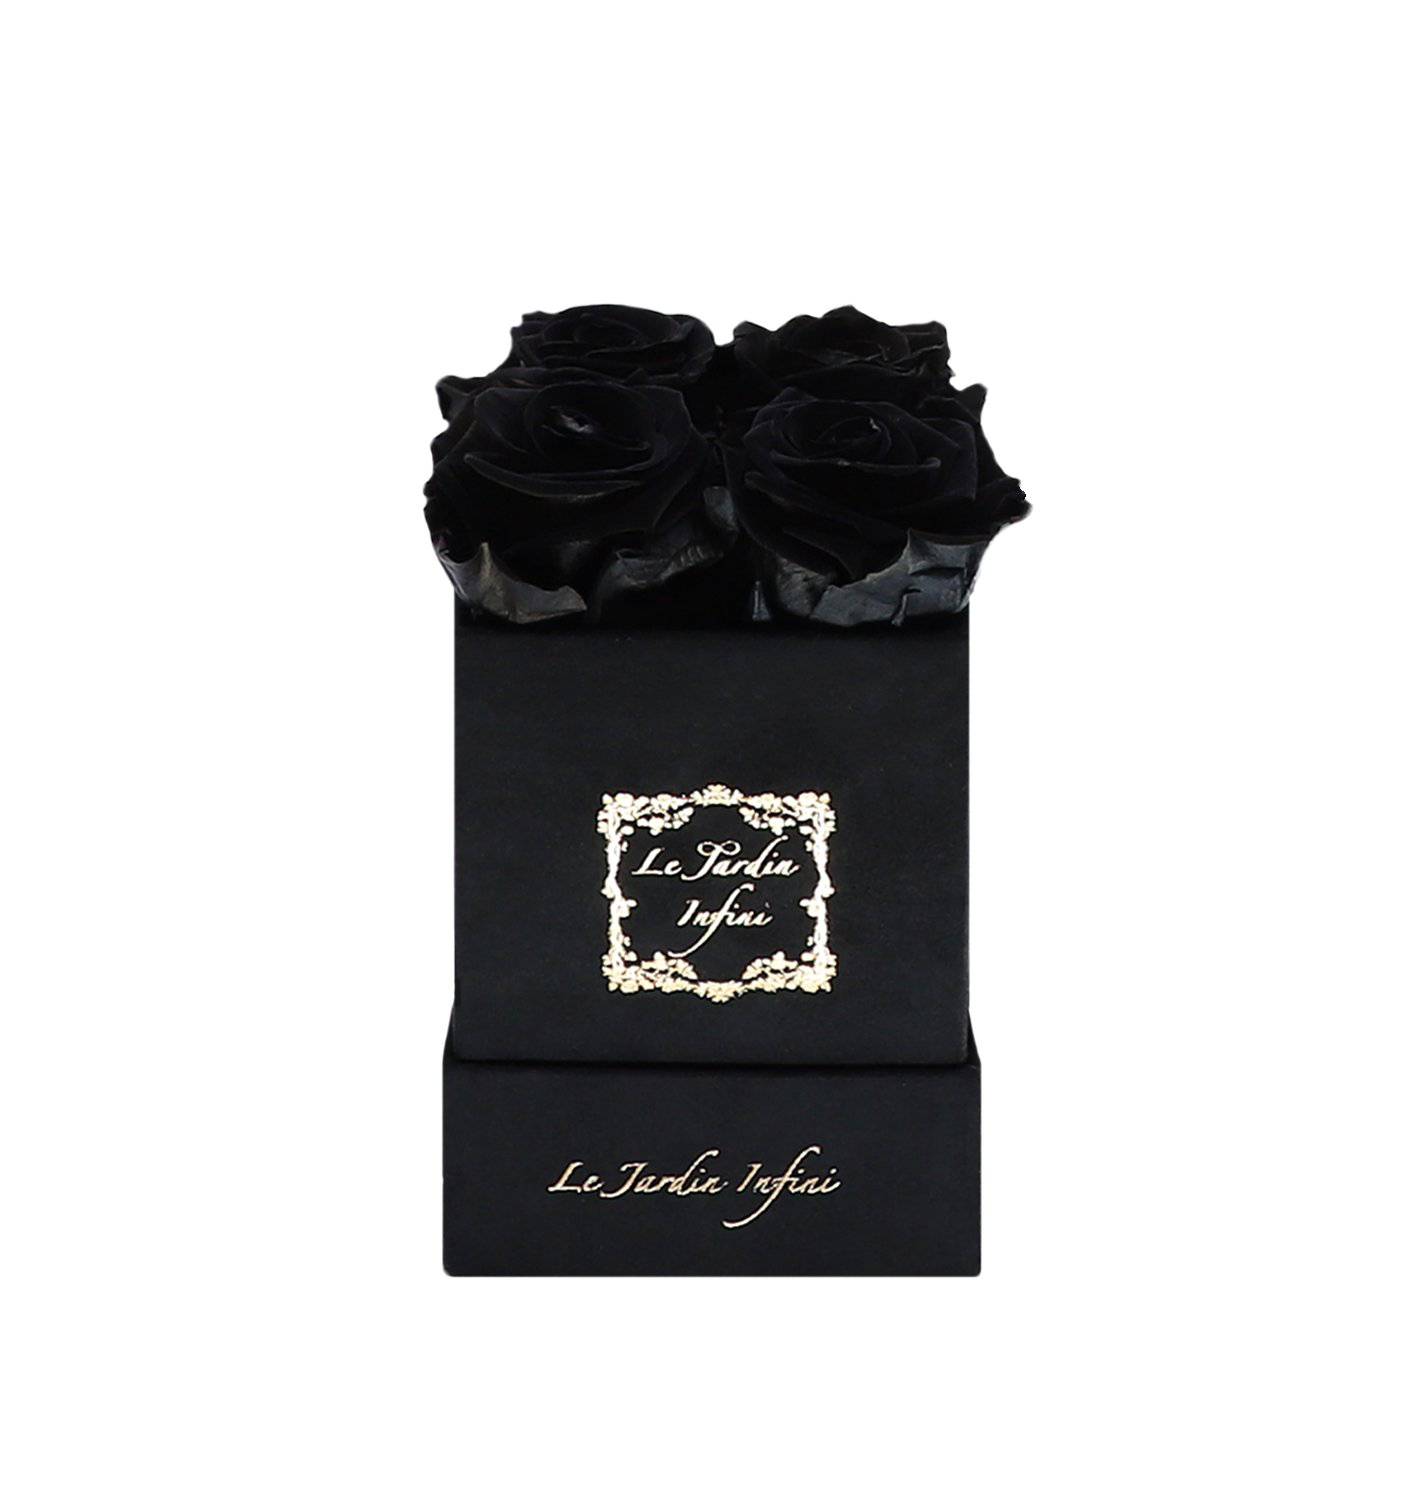 Black Preserved Roses - Small Square Black Suede Box